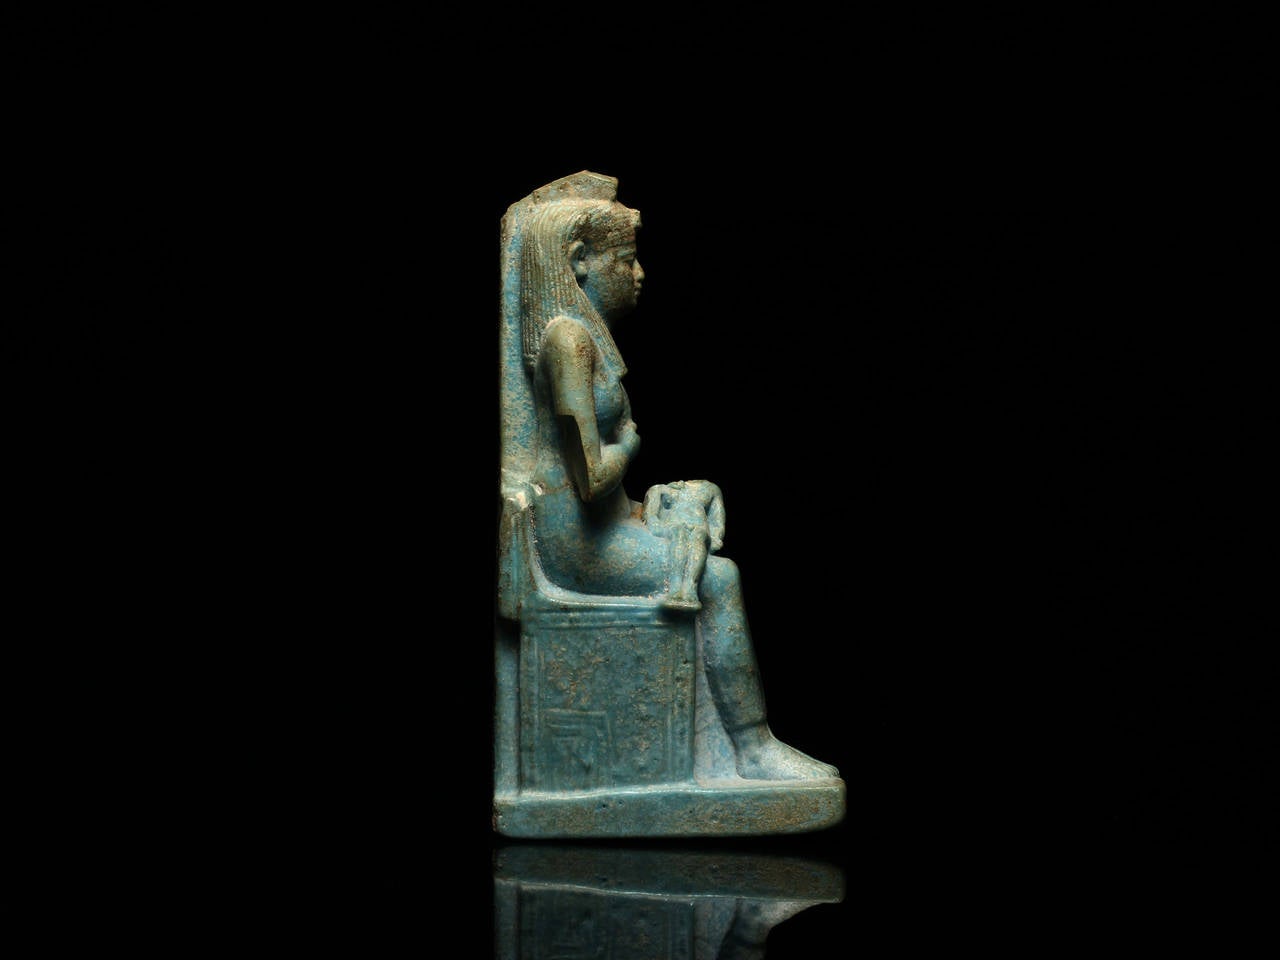 Ancient Egyptian Statuette of Isis and Horus For Sale at 1stdibs